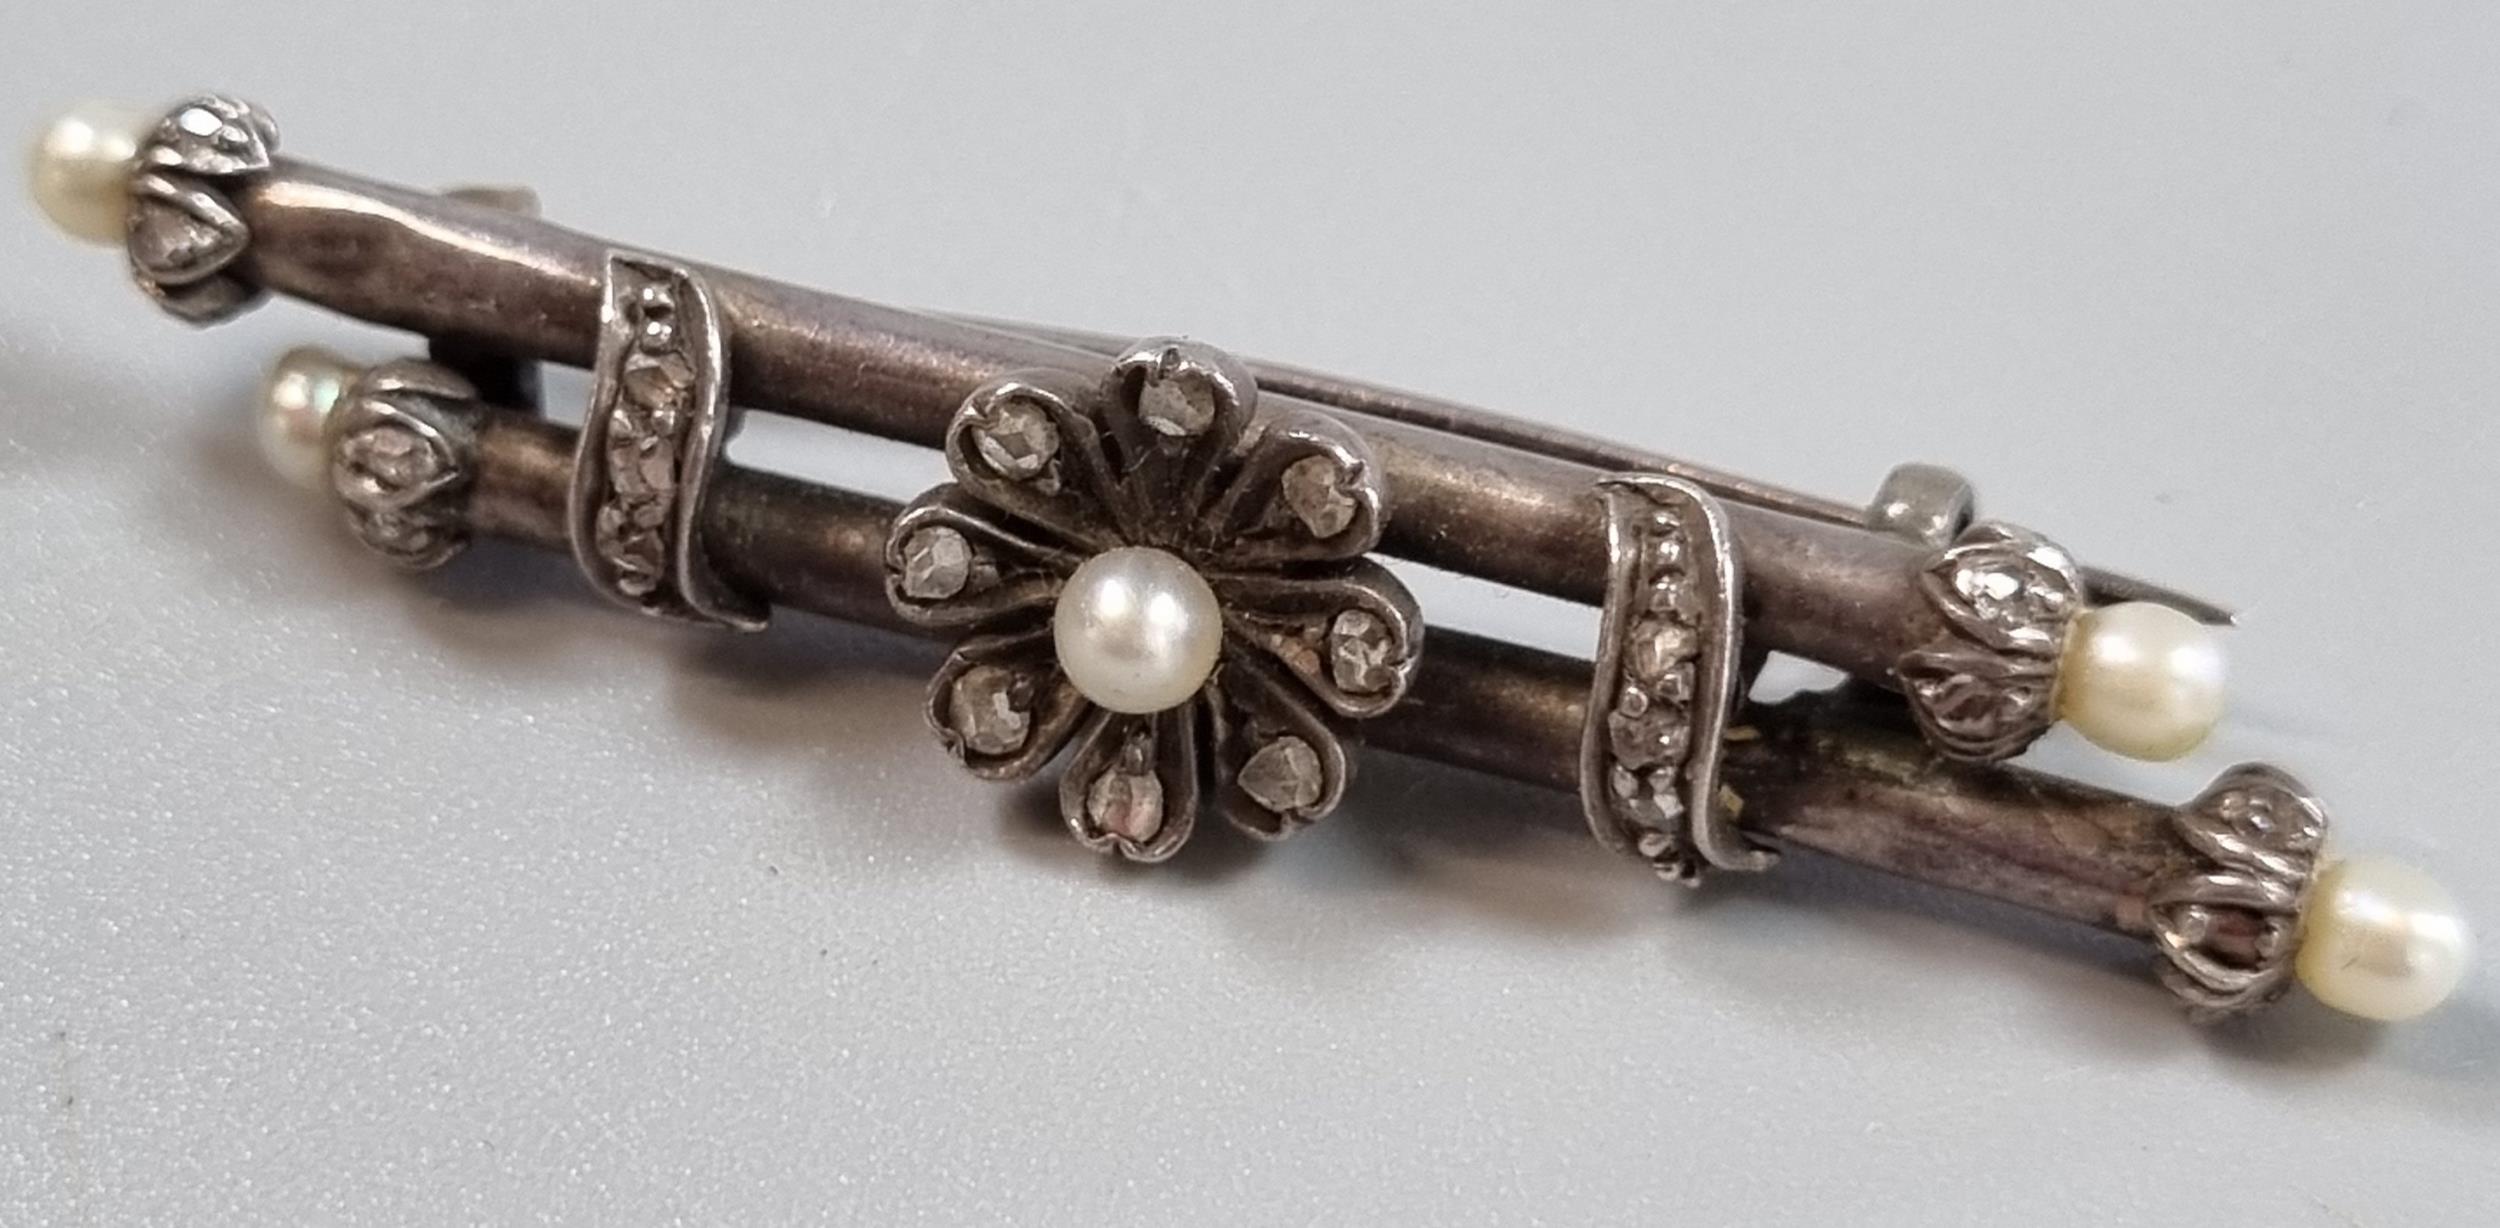 19th century ornate brooch set with pearls and small rose cut diamonds together with a moonstone - Image 3 of 3